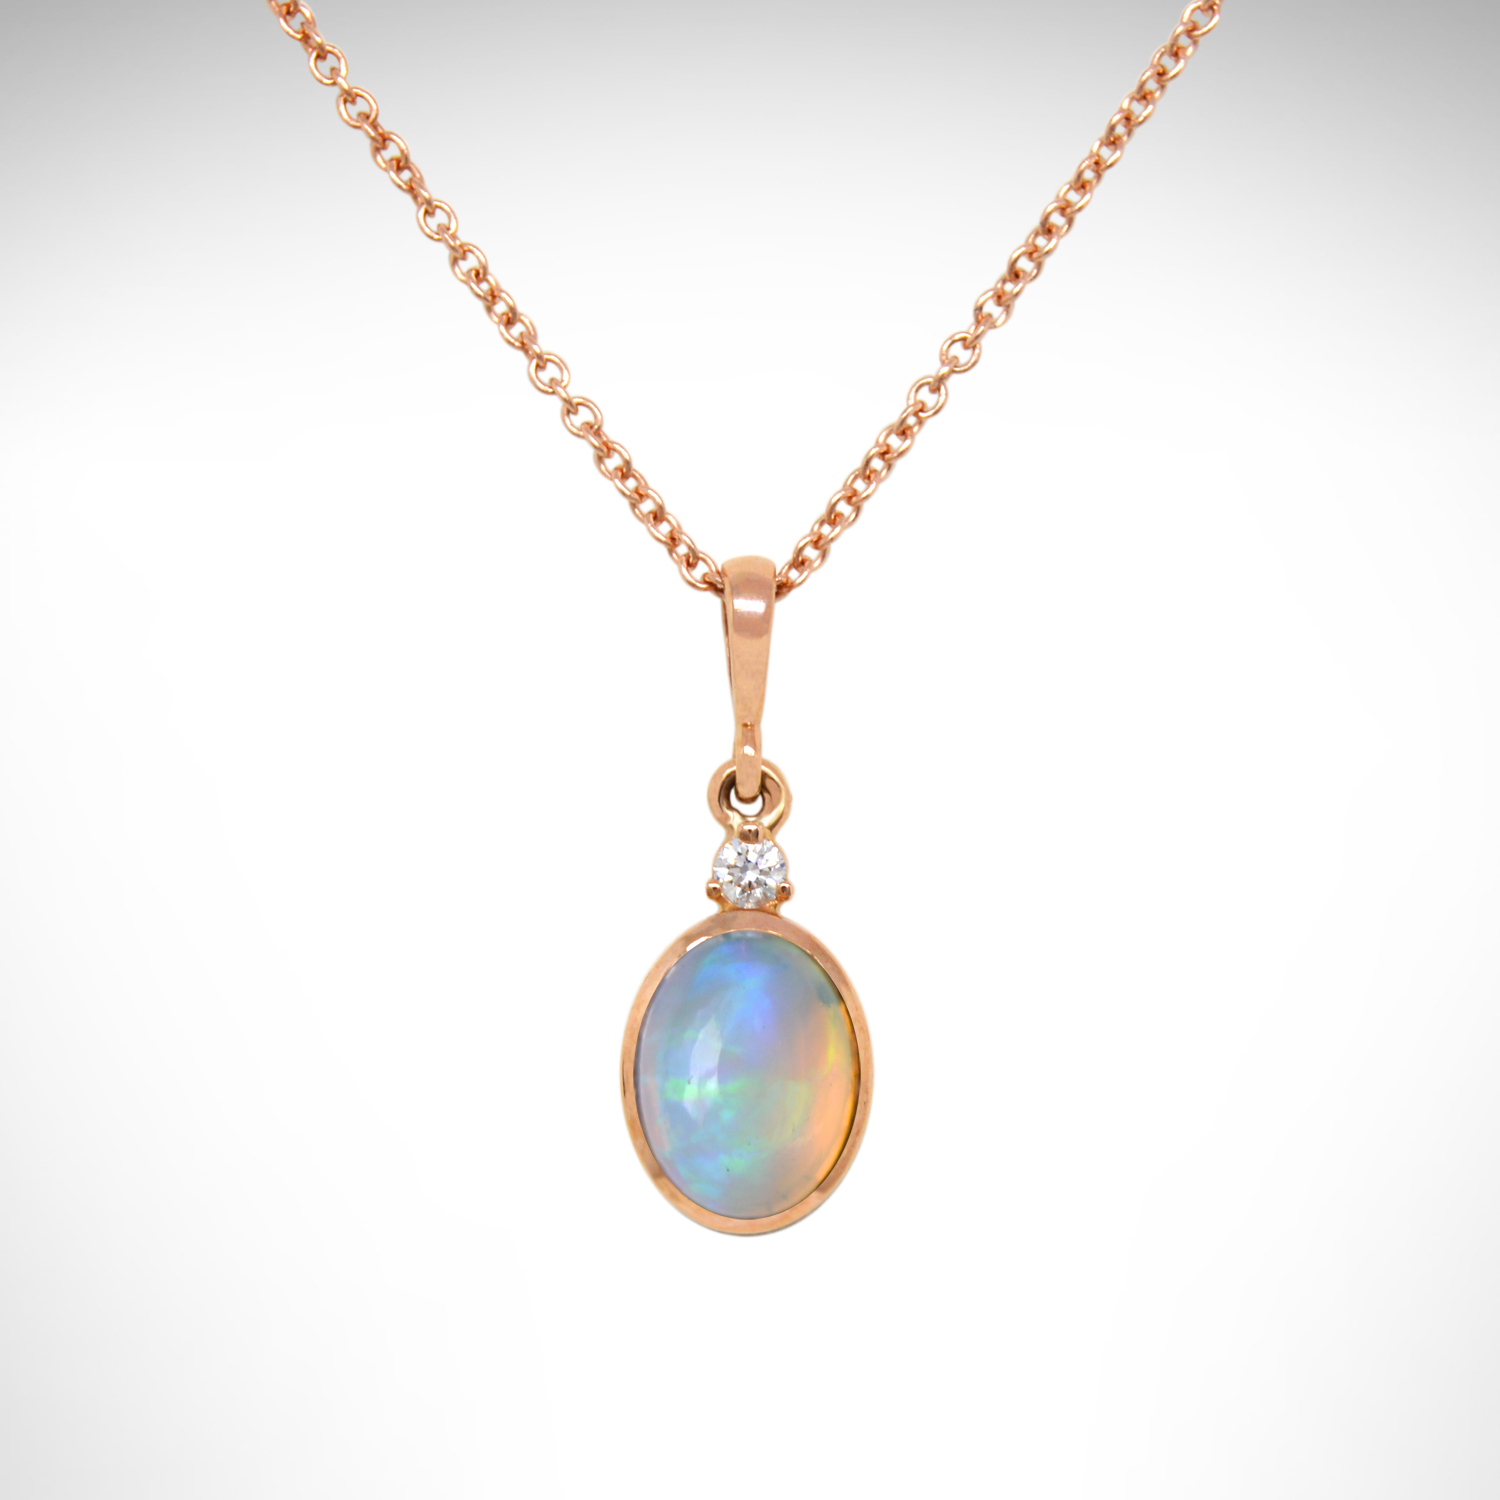 Opal 14K Rose Gold Necklace with Diamond Accent - Morgan's Treasure